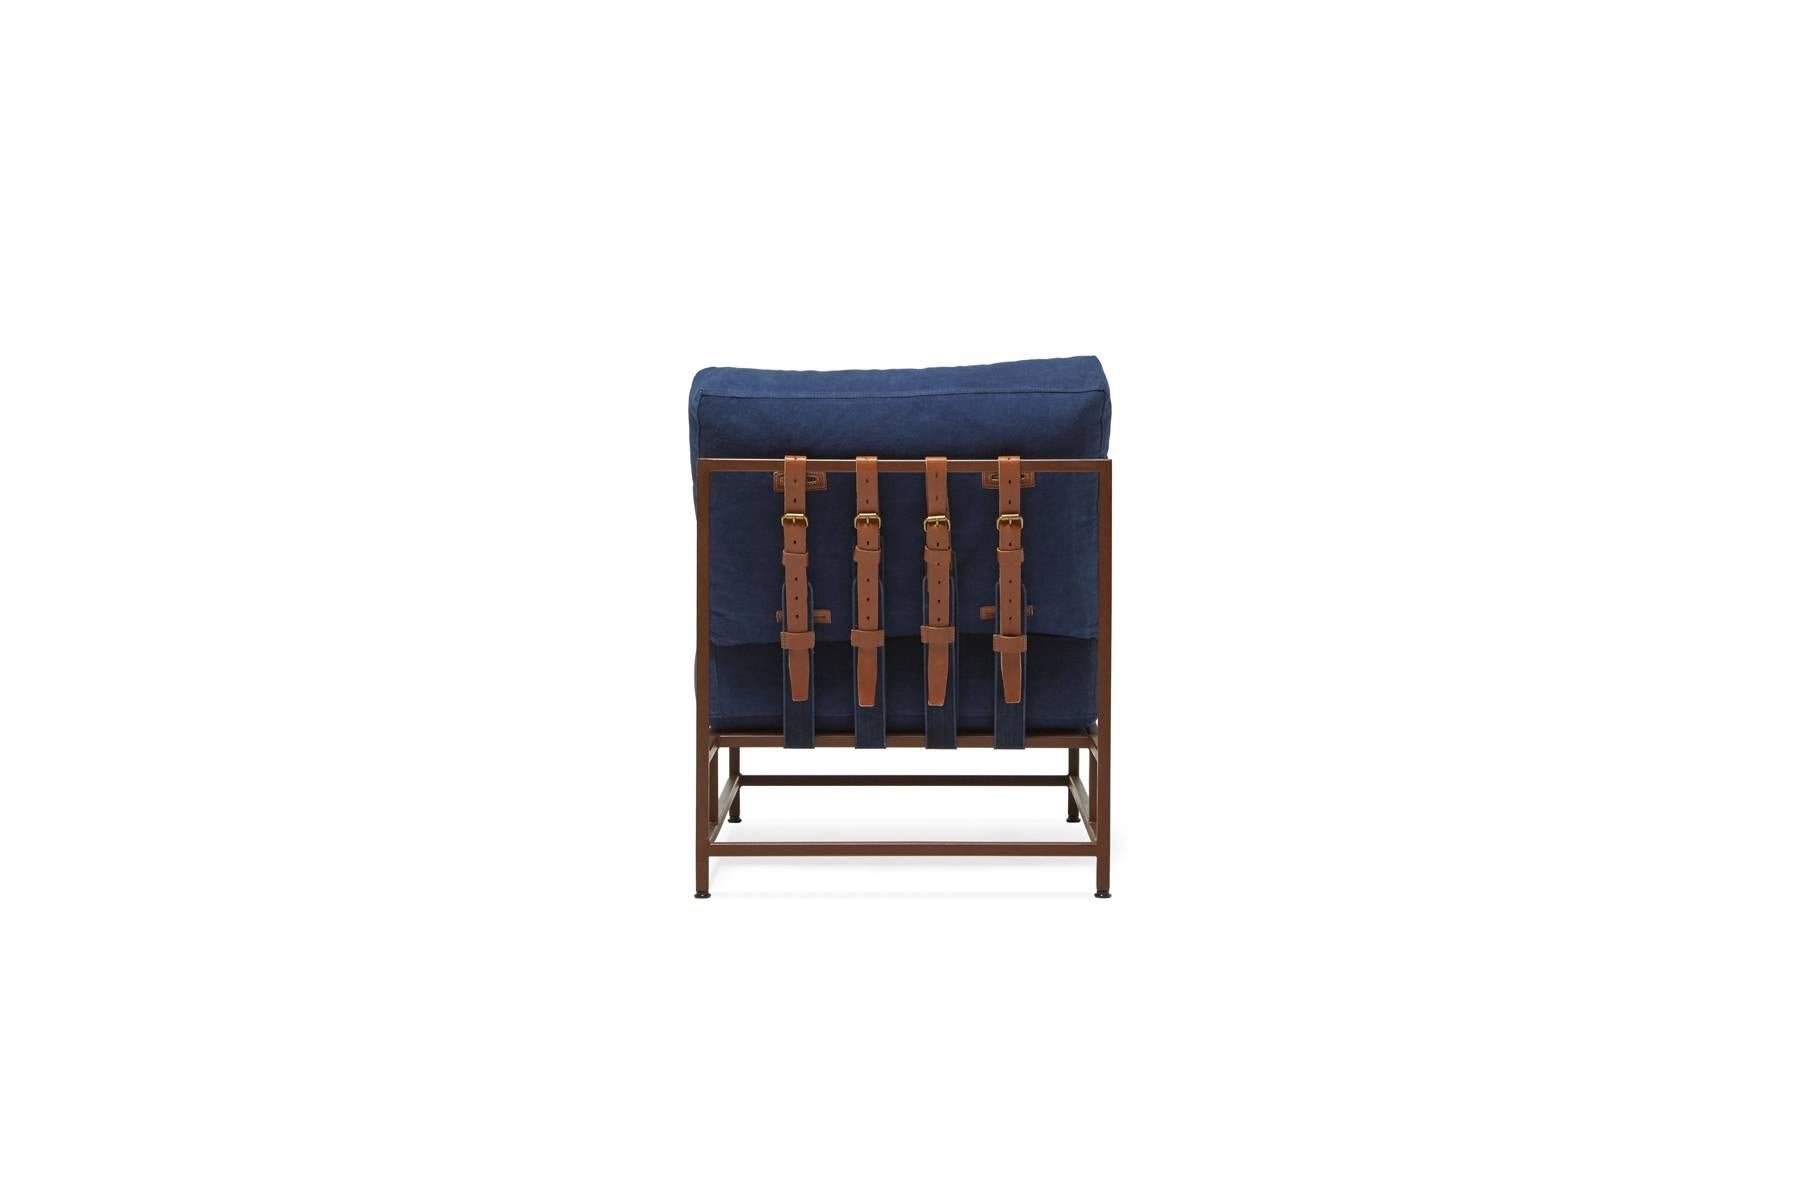 Vegetable Dyed Hand-Dyed Indigo Canvas and Marbled Rust Chair For Sale